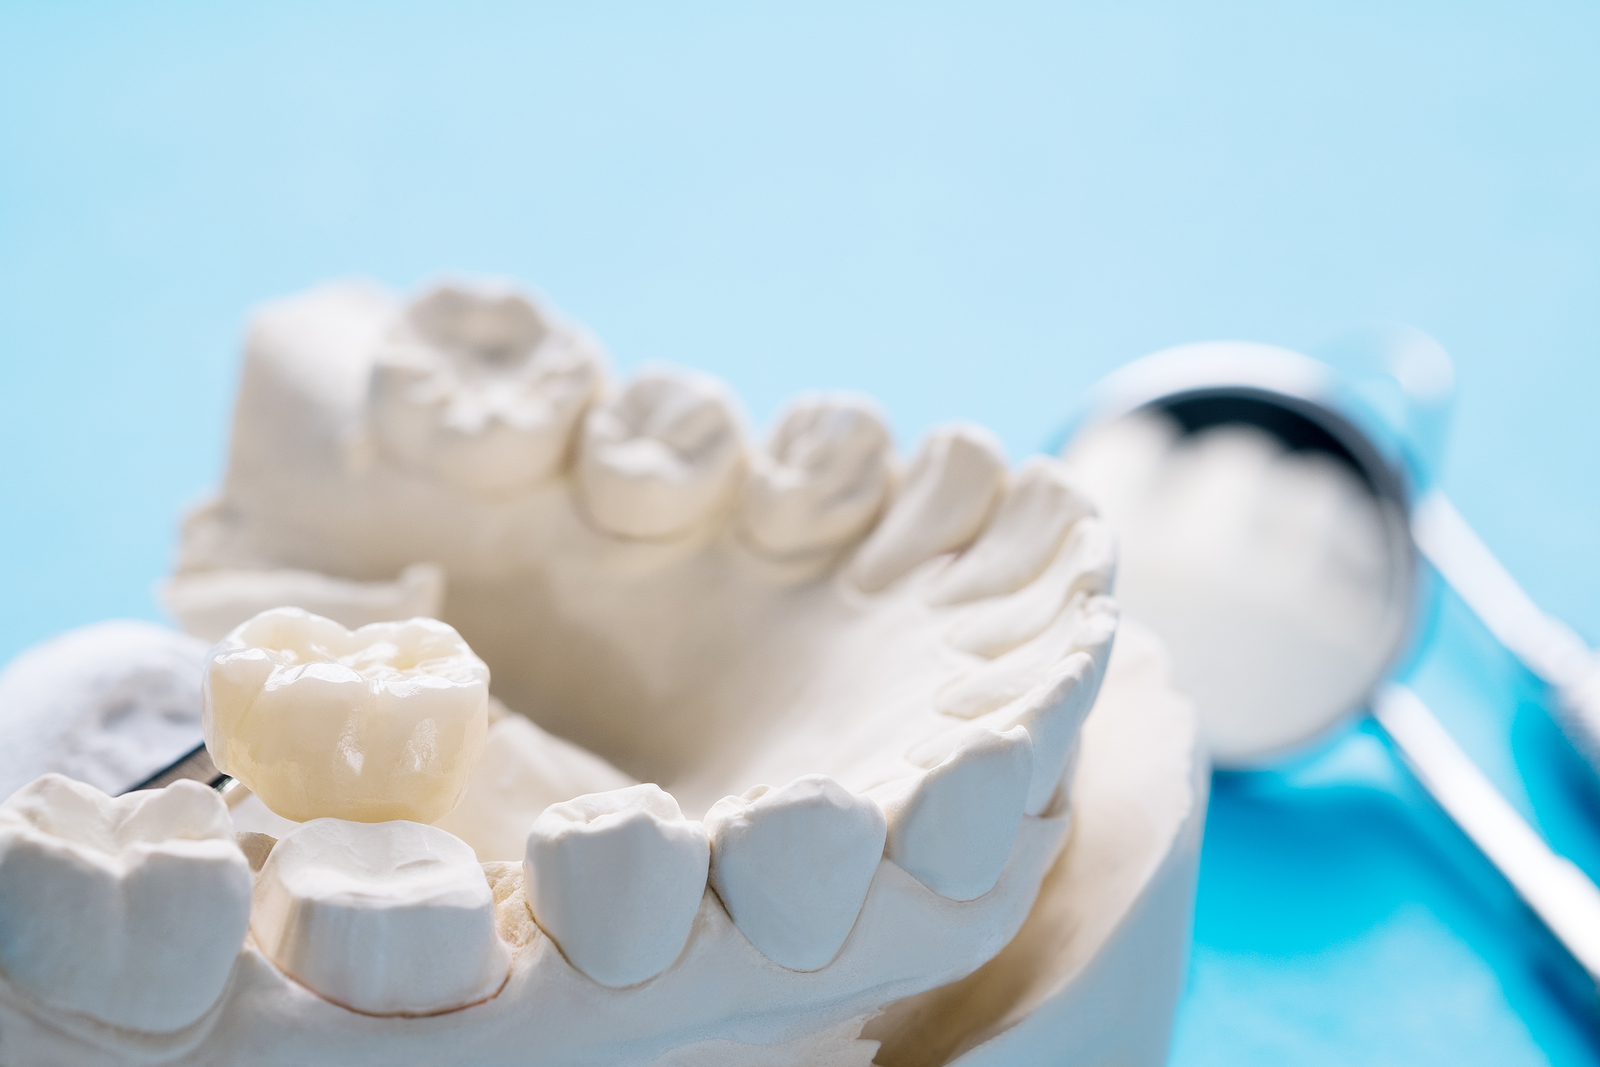 Understanding Porcelain Crowns and Their Benefits